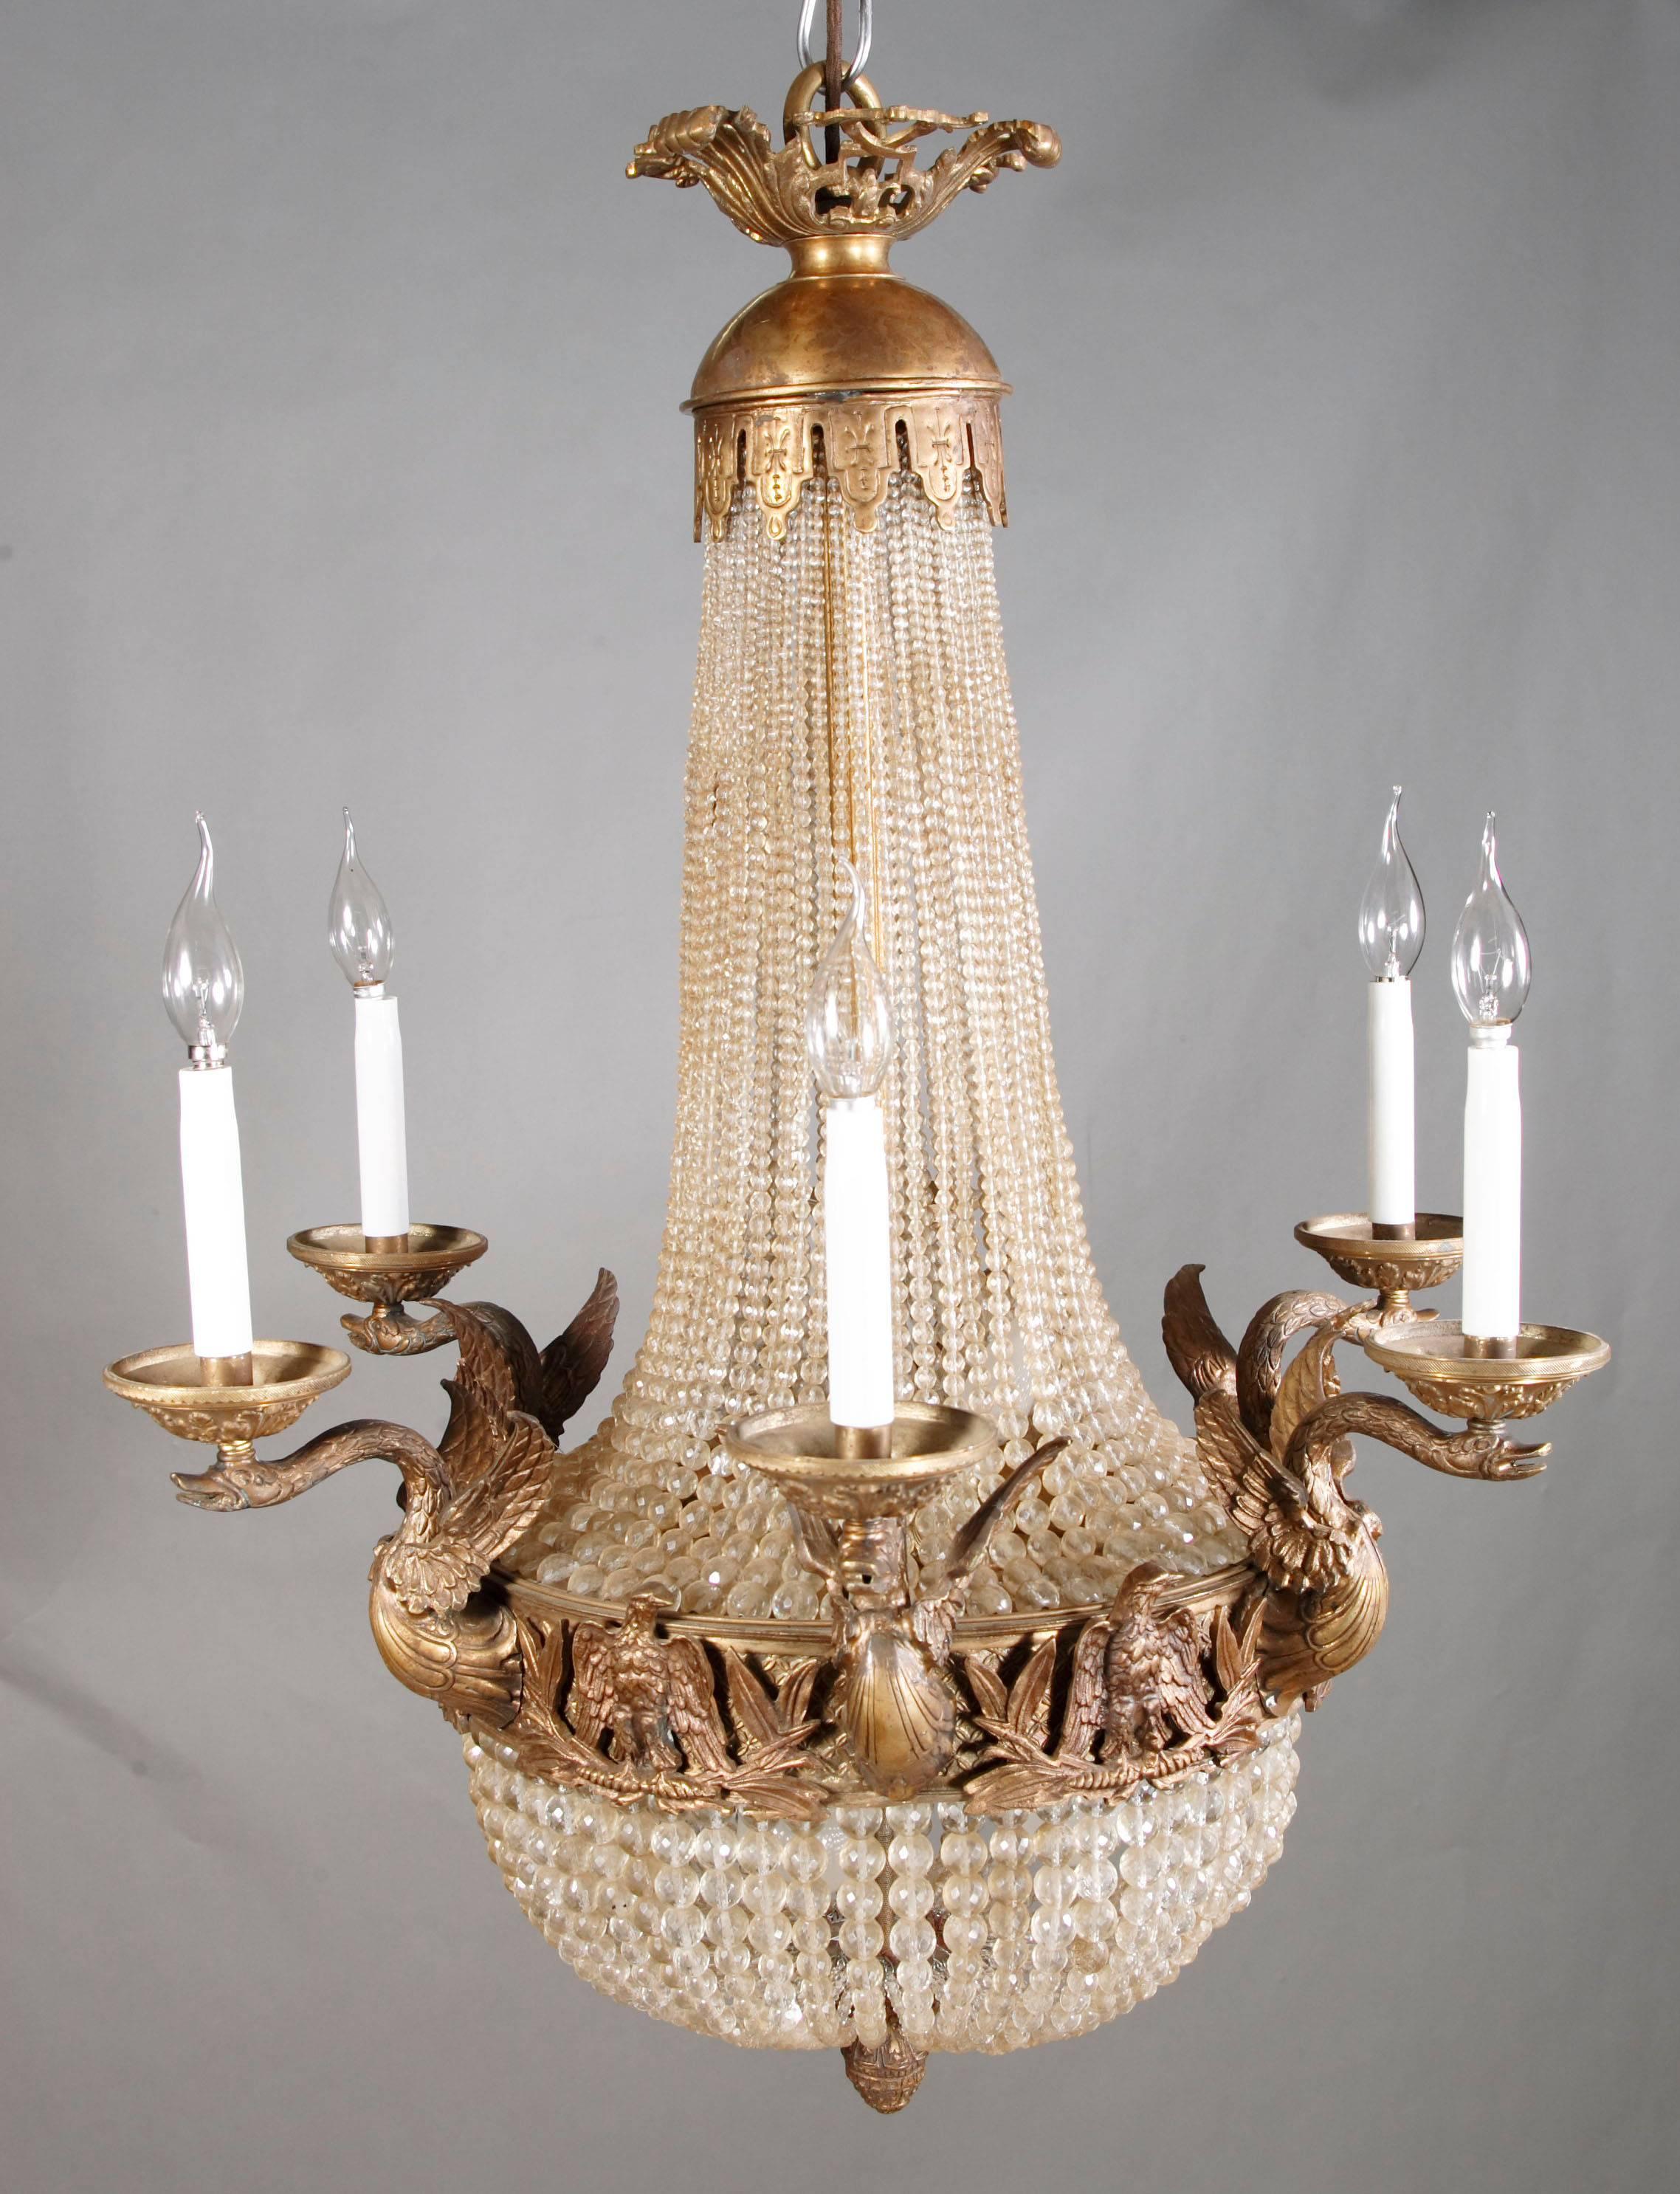 Splendid chandelier or candelabra in French Empire style
Bronze patinated. There from, a with six swans designed light arms.

(F-Ks-2).